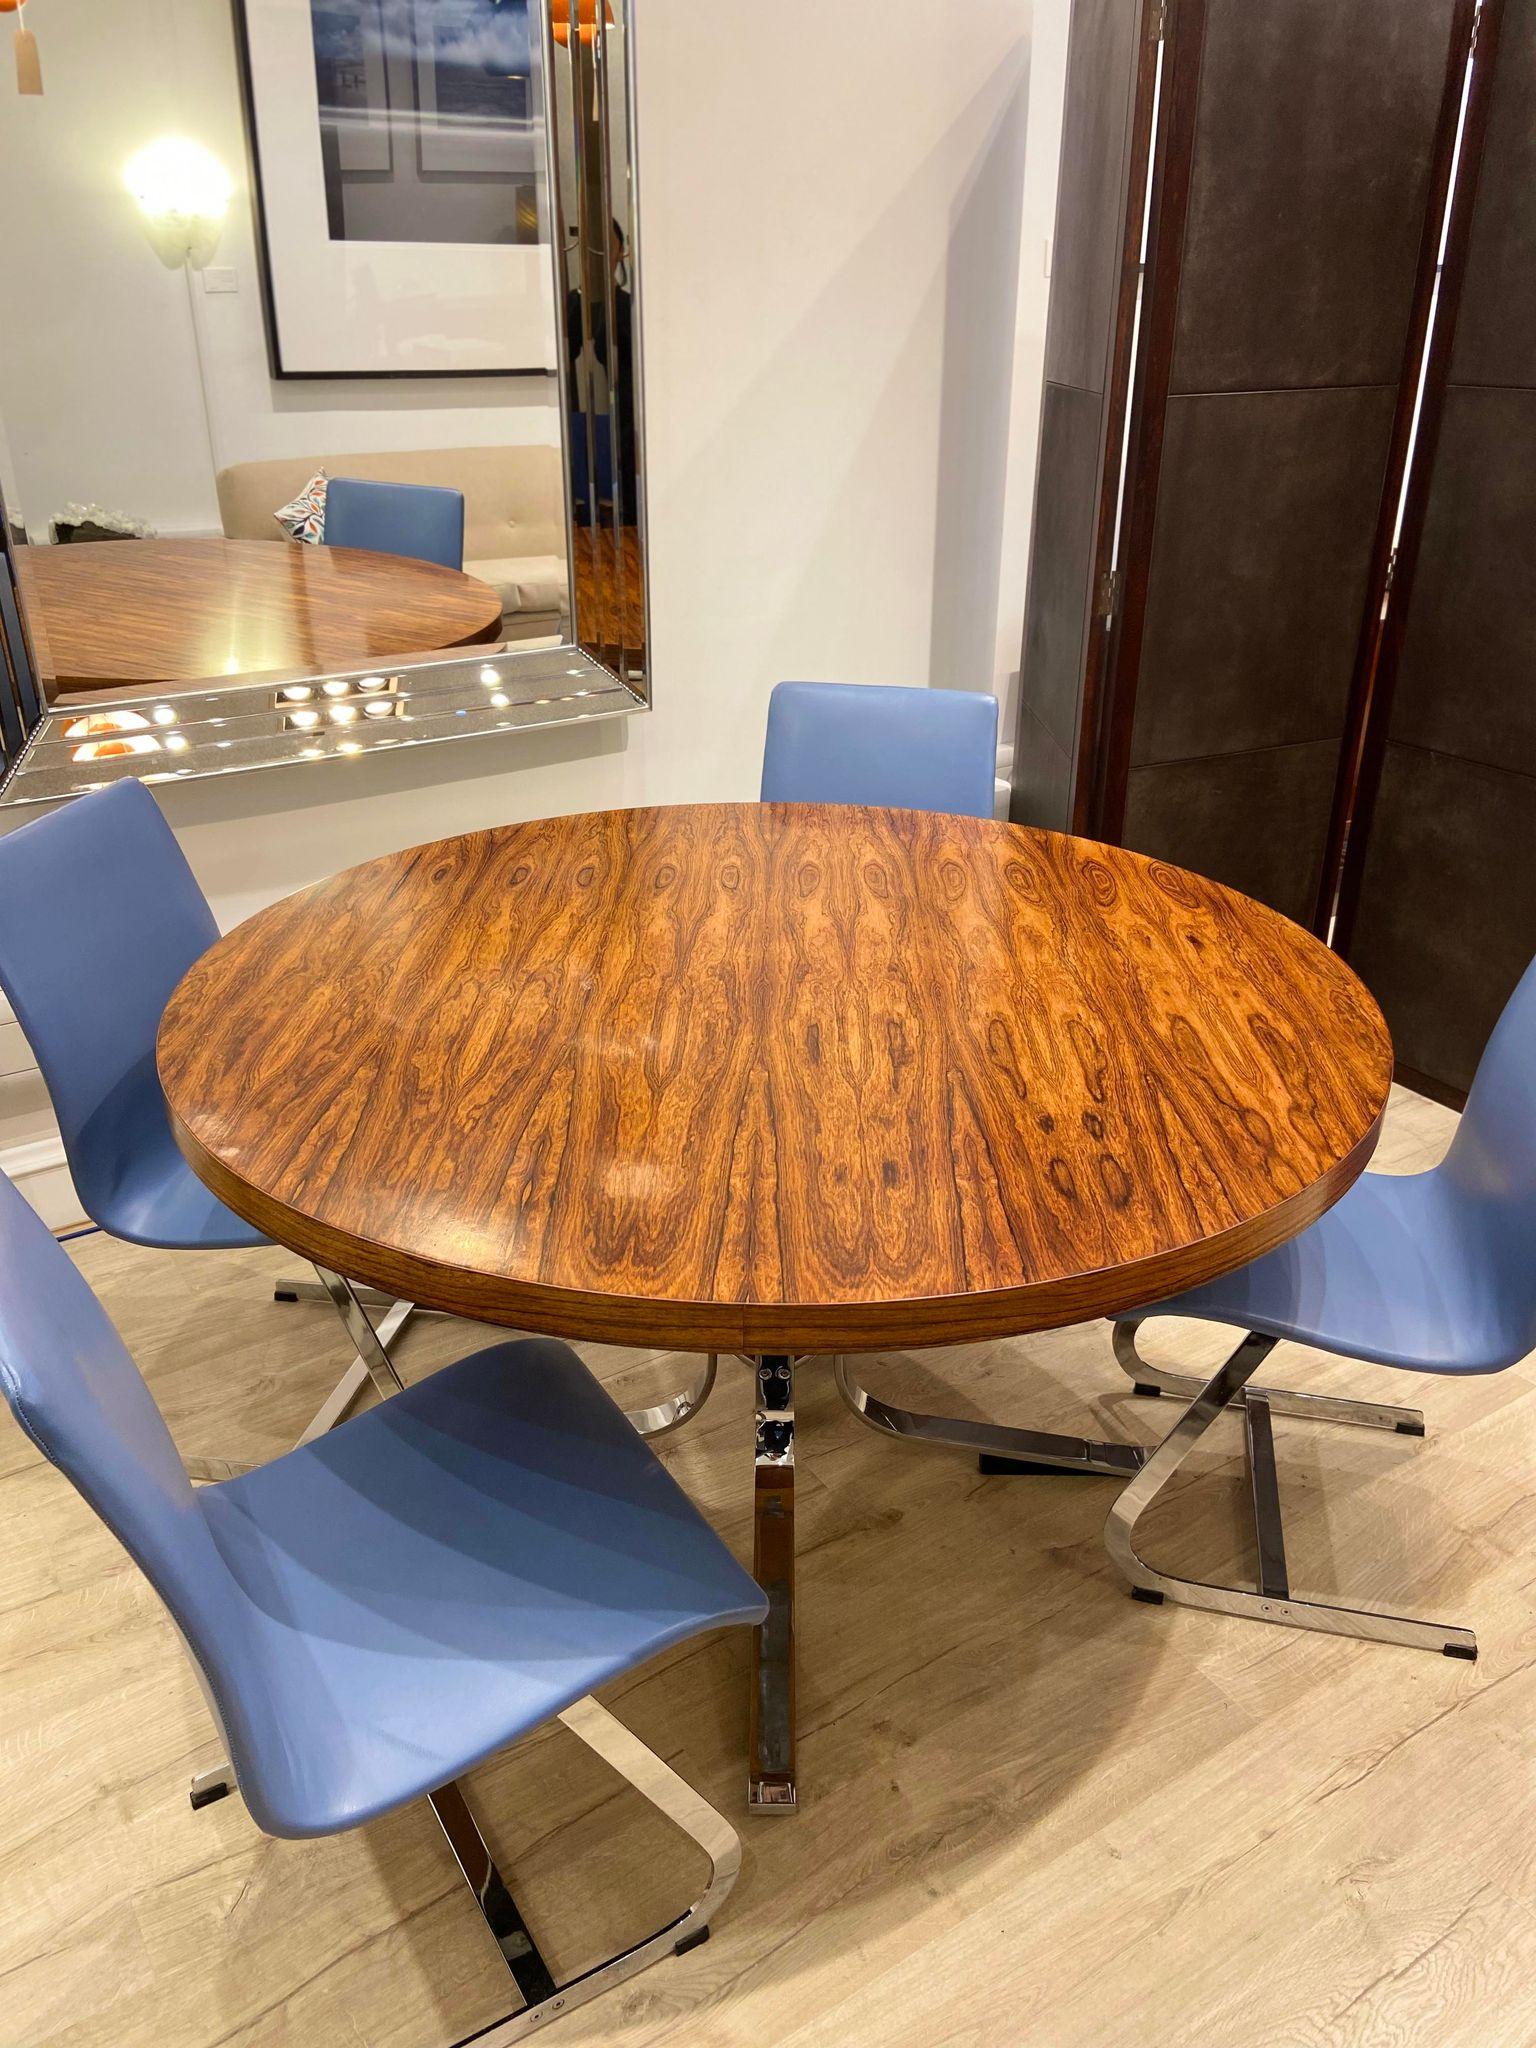 Vintage 1960's Rosewood Merrow Associates round dining table set on a chrome base. 

Dimensions:
Width: 137 cm
Height: 75 cm